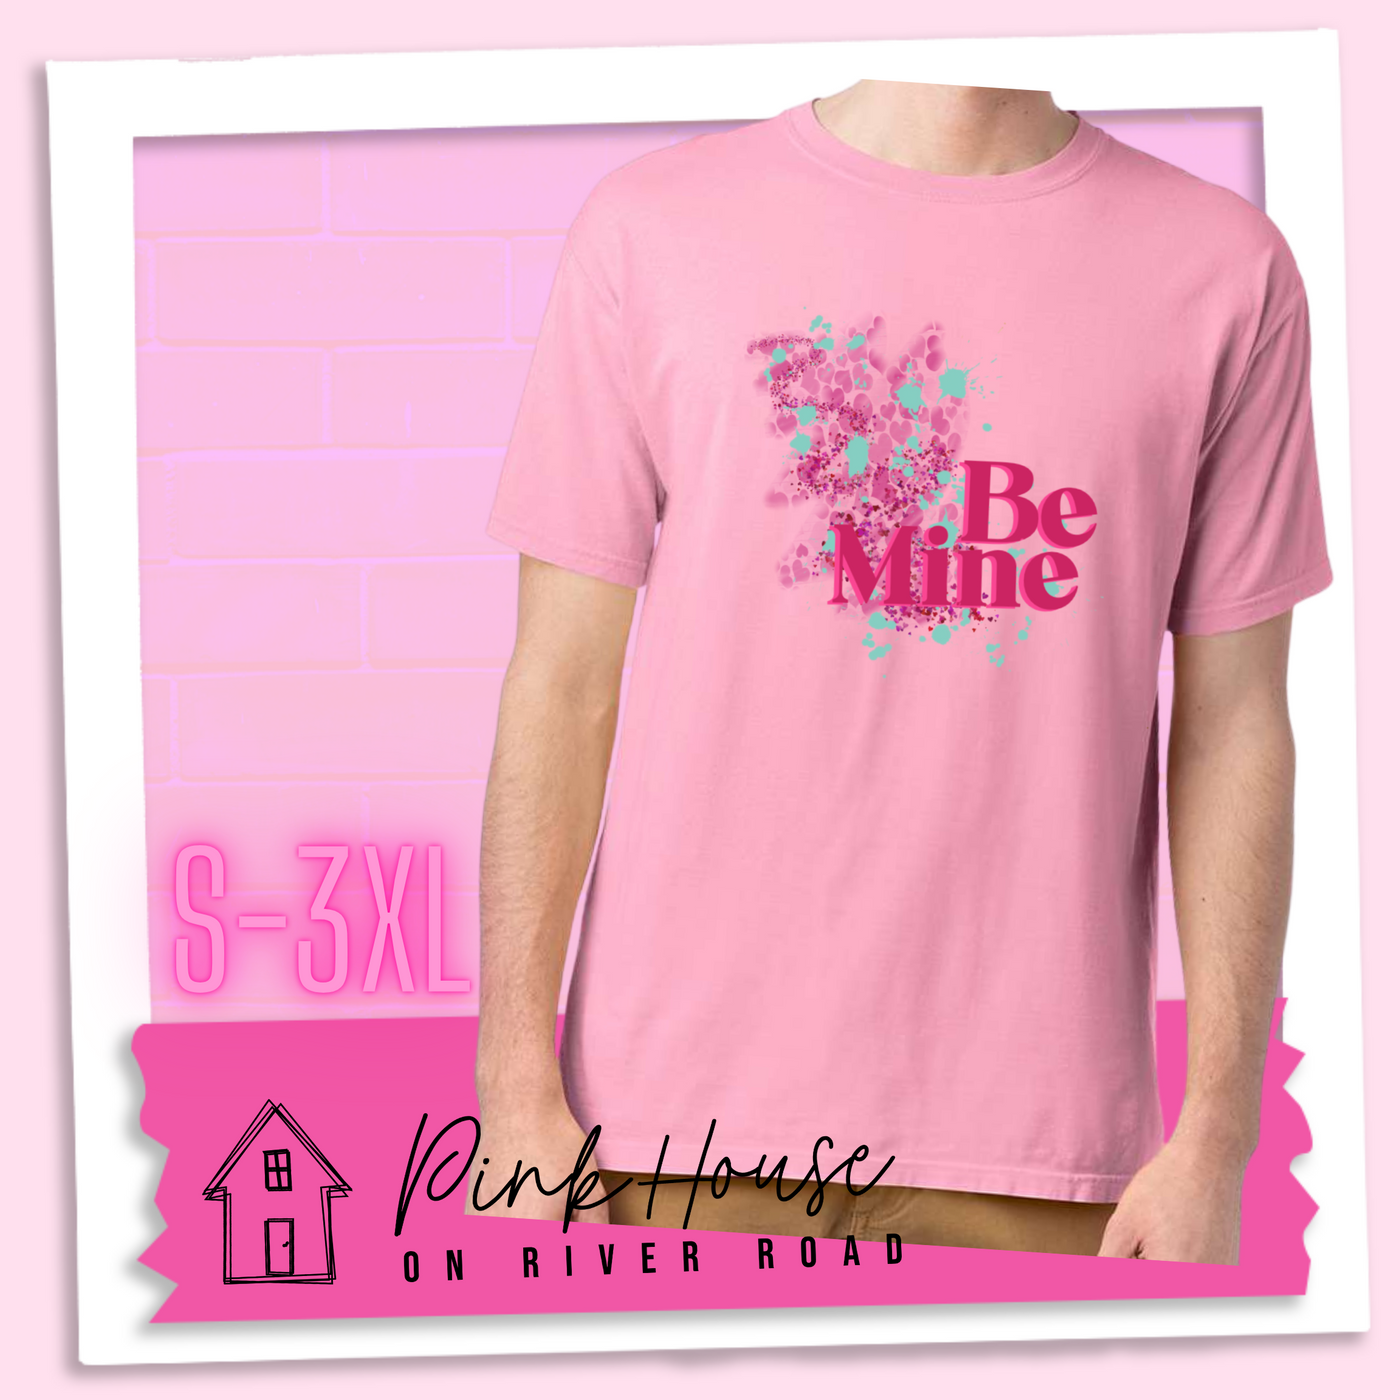 Cotton Candy Tee with a squiggle design made of pink hearts and pink sparkles with light teal splatters and pink text at the end of the art that says Be Mine with a hot pink shadow.